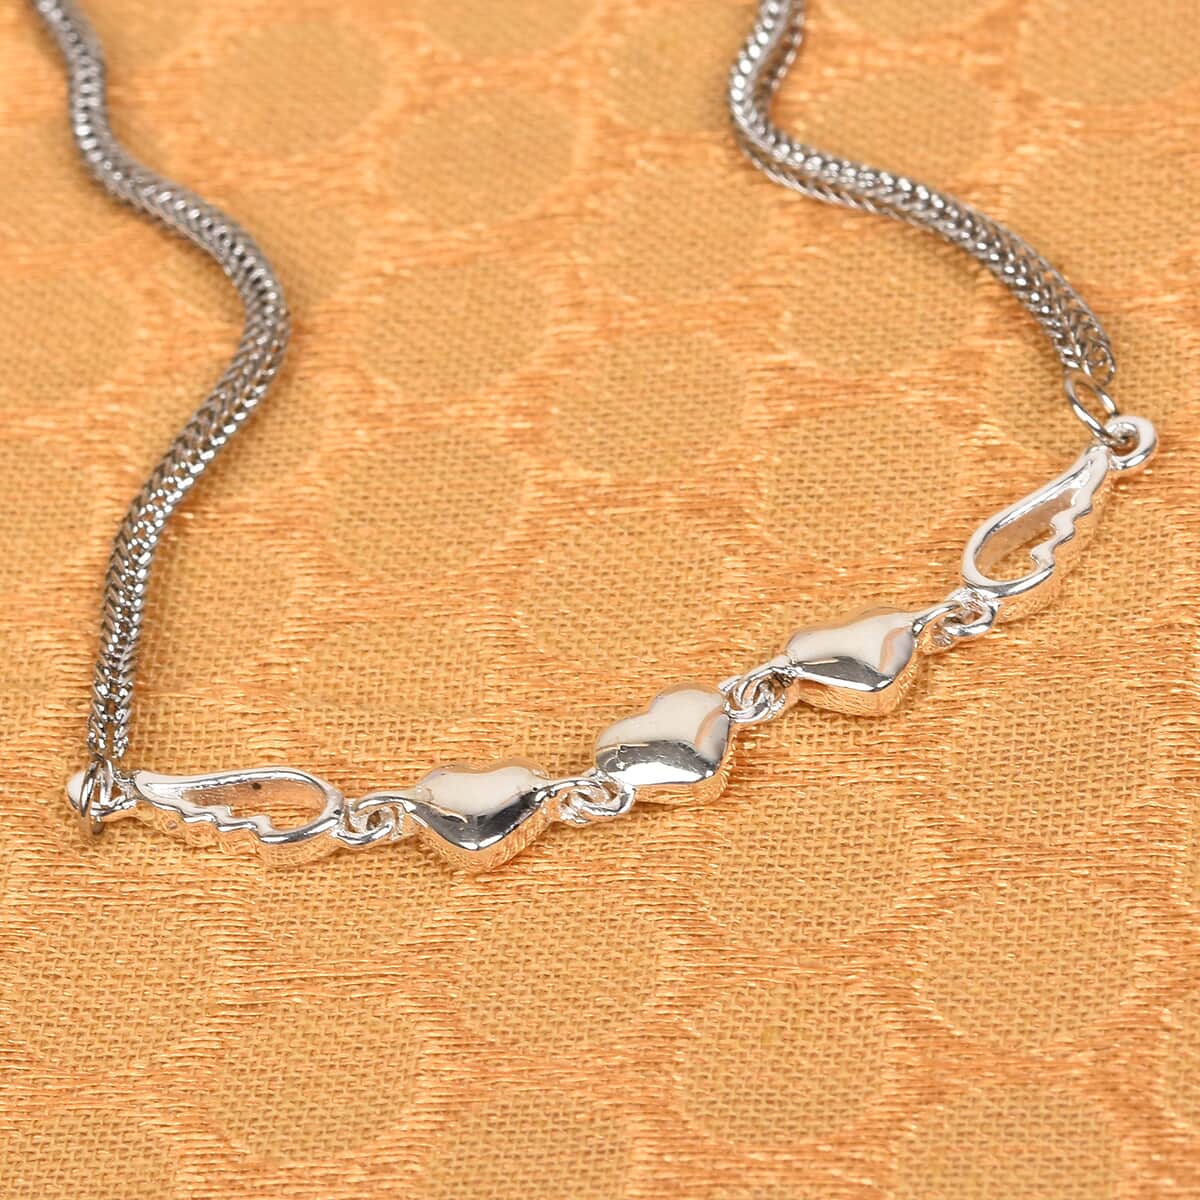 Buy Sterling Silver Heart Bracelet with Stainless Steel Bolo Chain